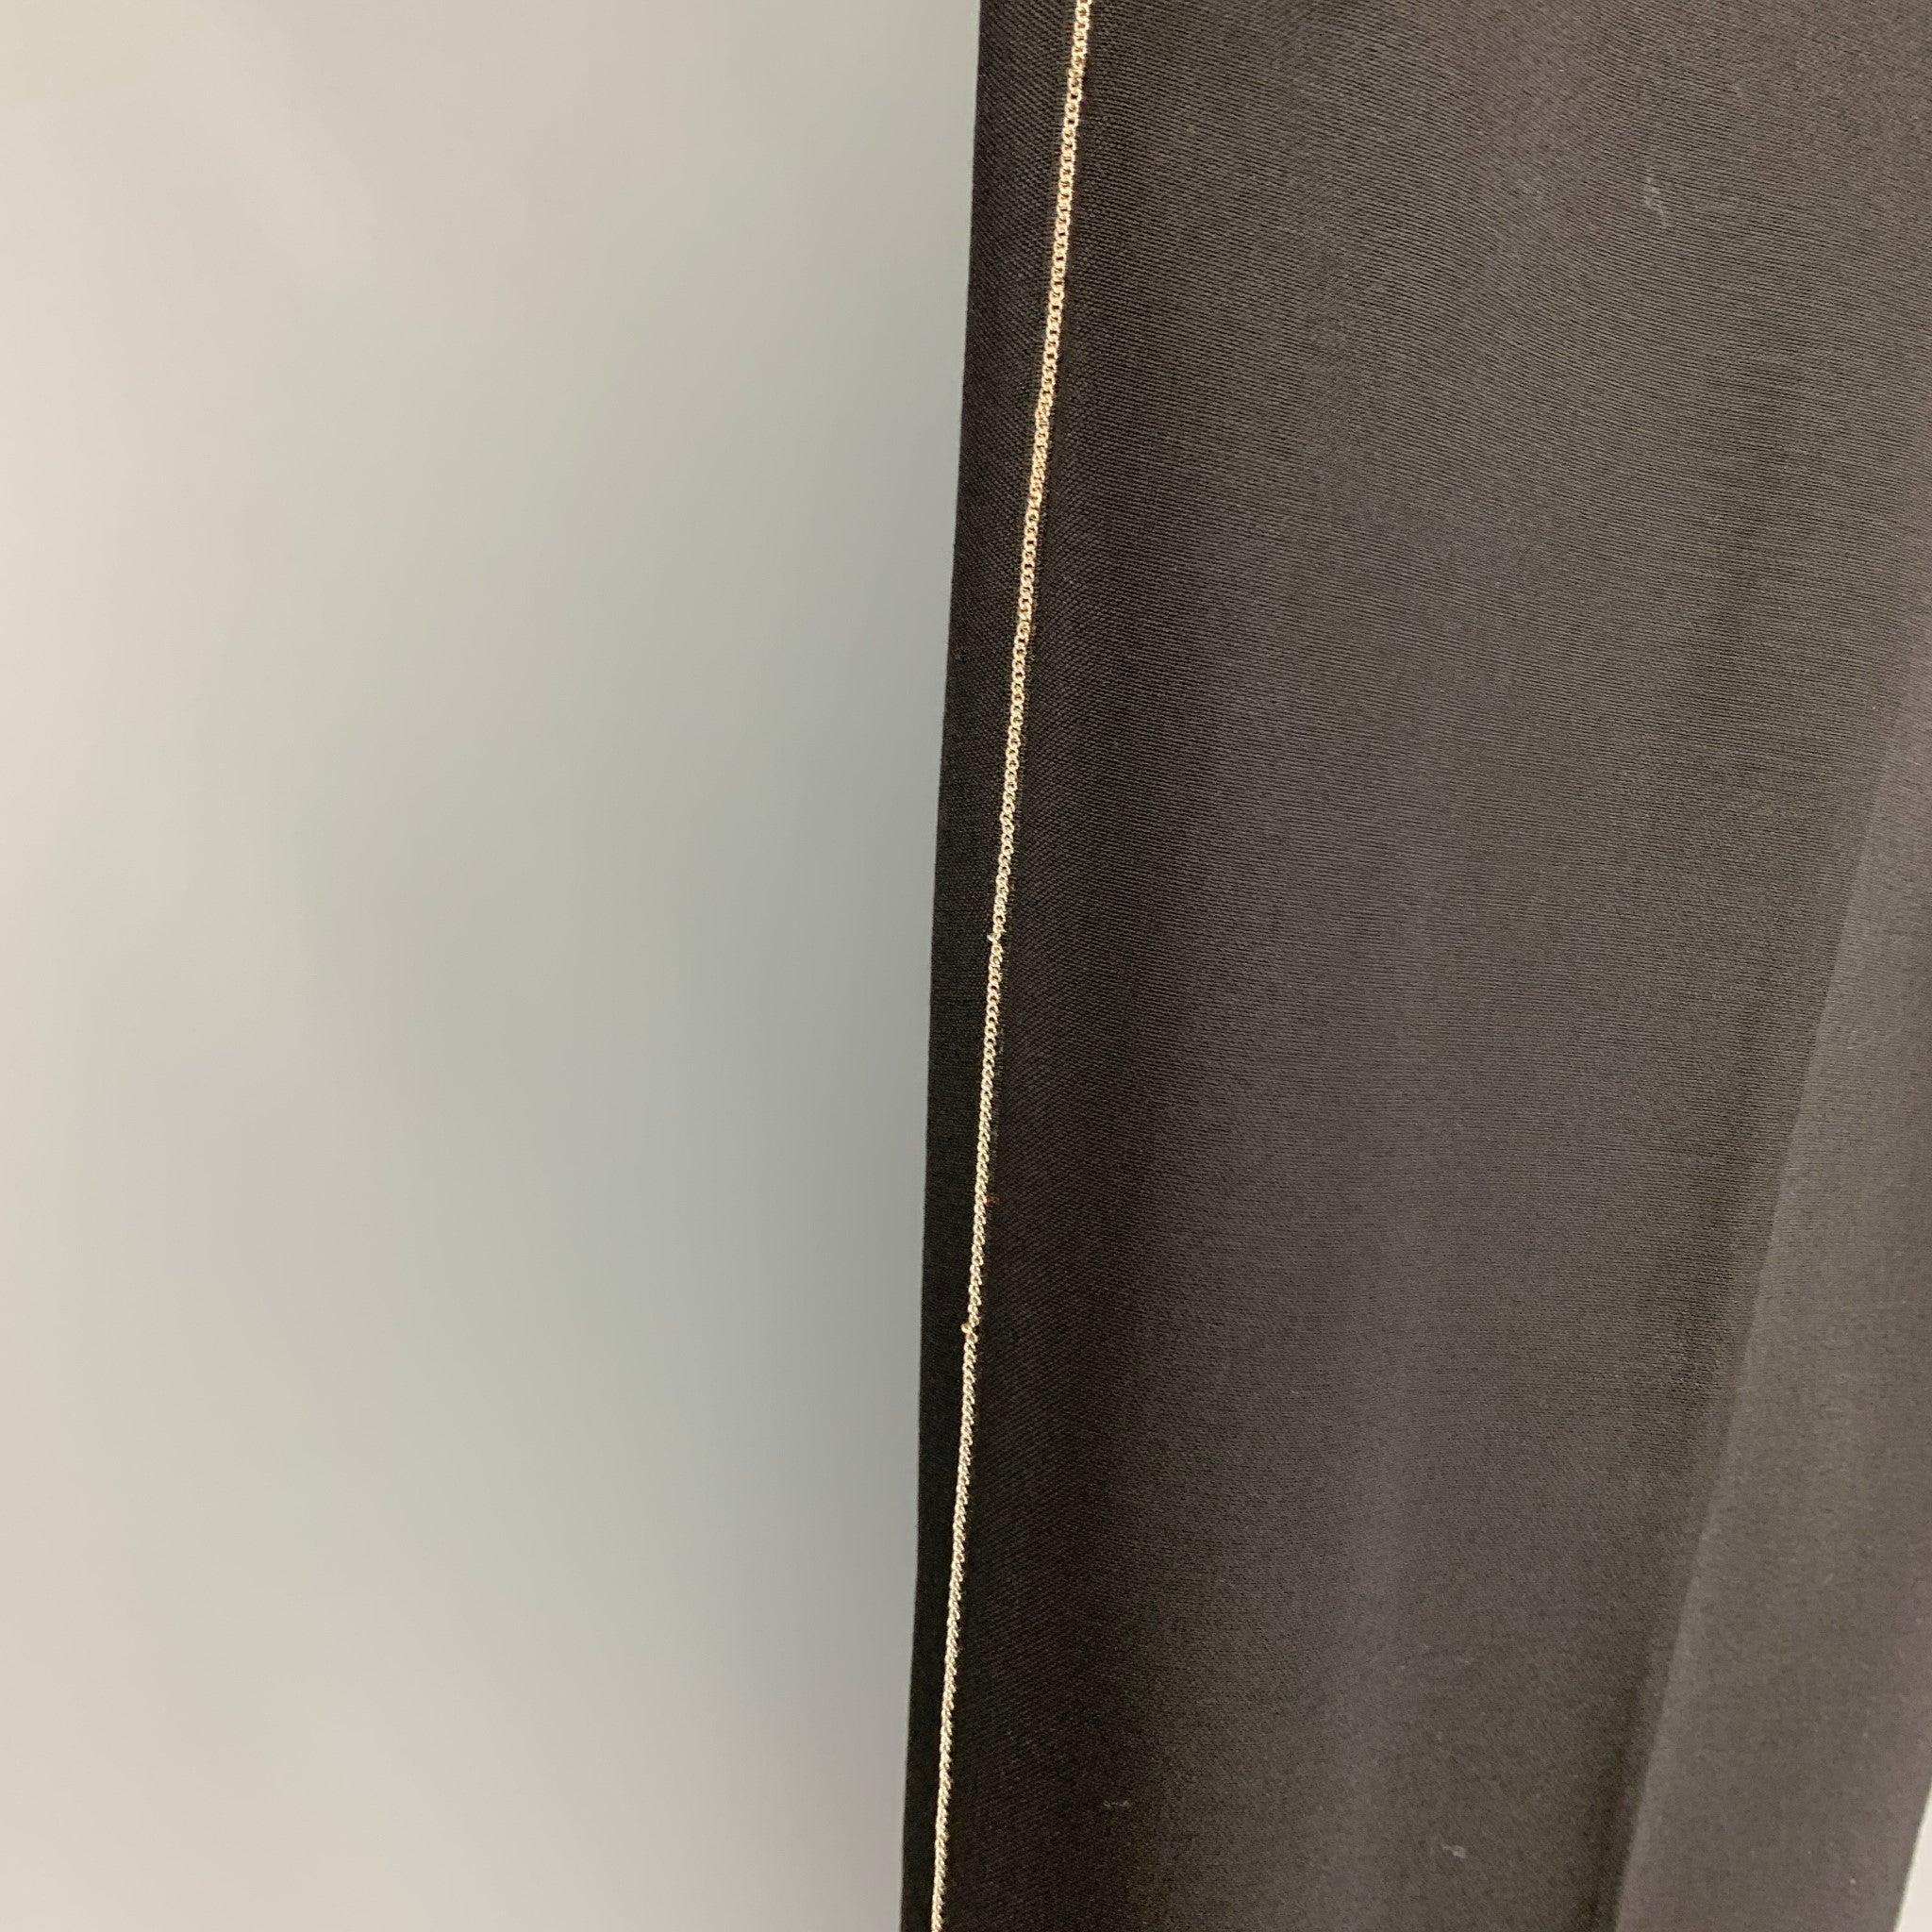 GIVENCHY dress pants comes in a black wool featuring a flat front, chain link trim, front tab, and a zip fly closure. Made in Italy.
Very Good
Pre-Owned Condition. 

Marked:   52 

Measurements: 
  Waist: 36 inches  Rise: 10 inches  Inseam: 30